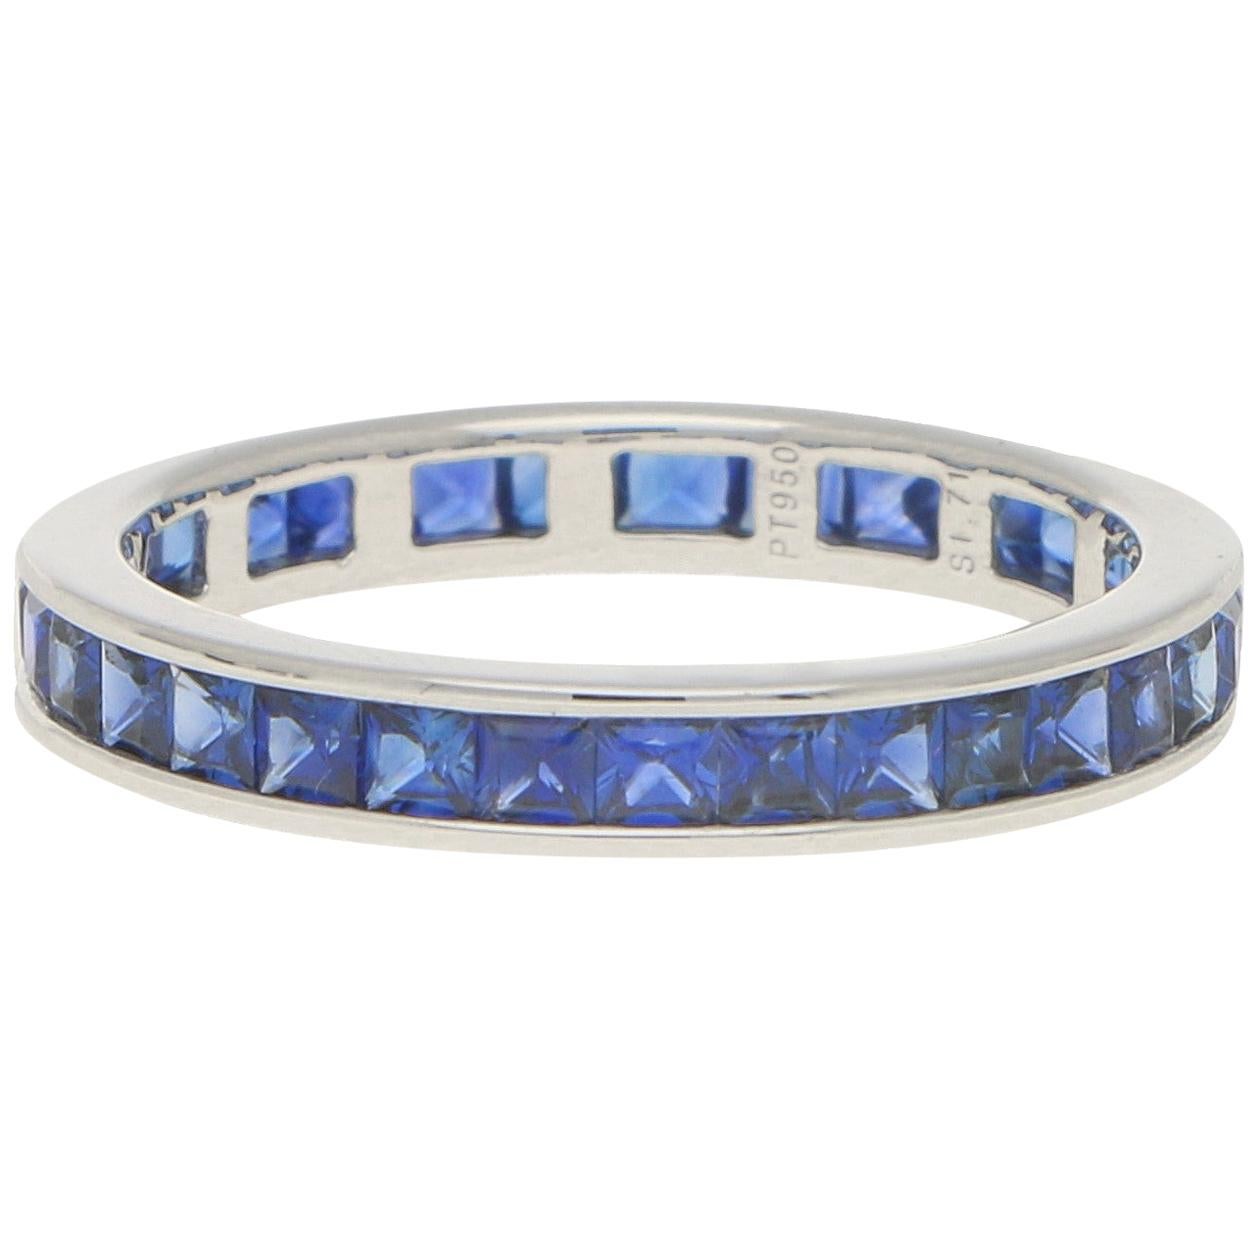 Art Deco Inspired Invisibly Set Sapphire Full Eternity Ring Set in Platinum